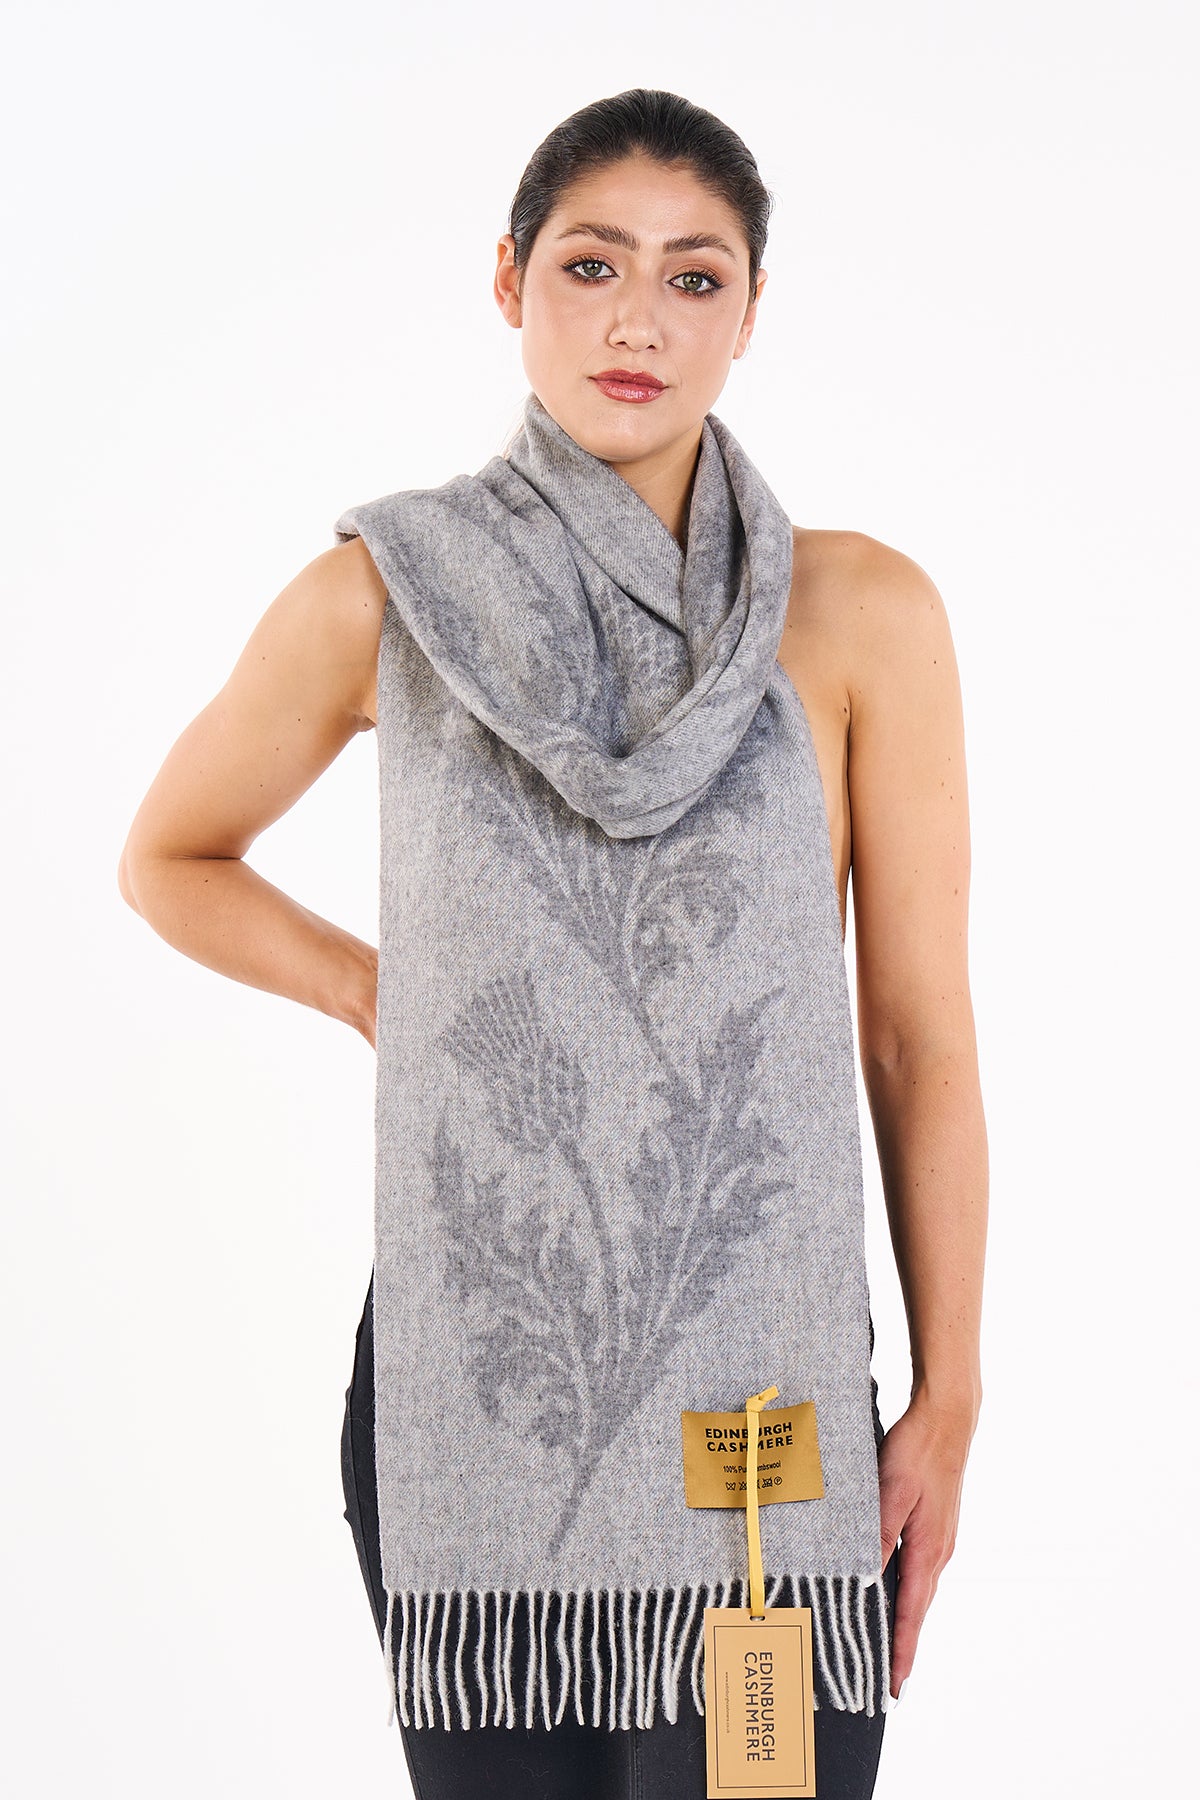 Scarf Single Thistle Grey 100% Pure Lambswool